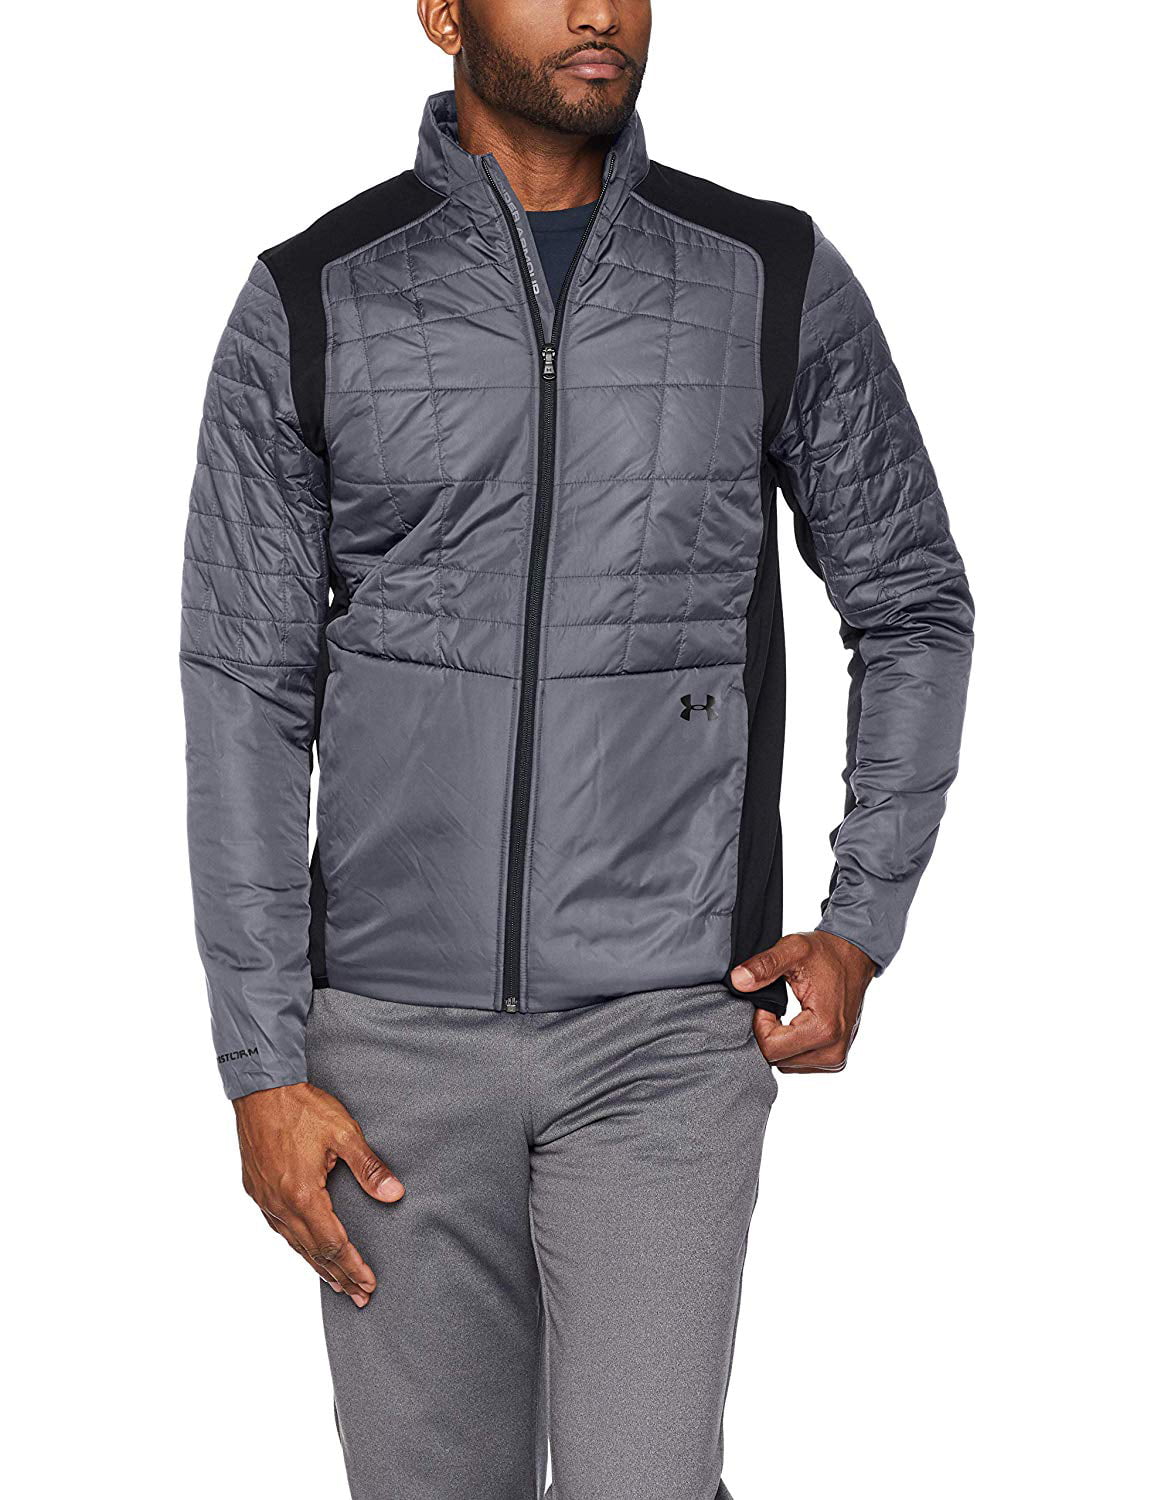 Under Armour Men's Storm Insulated 